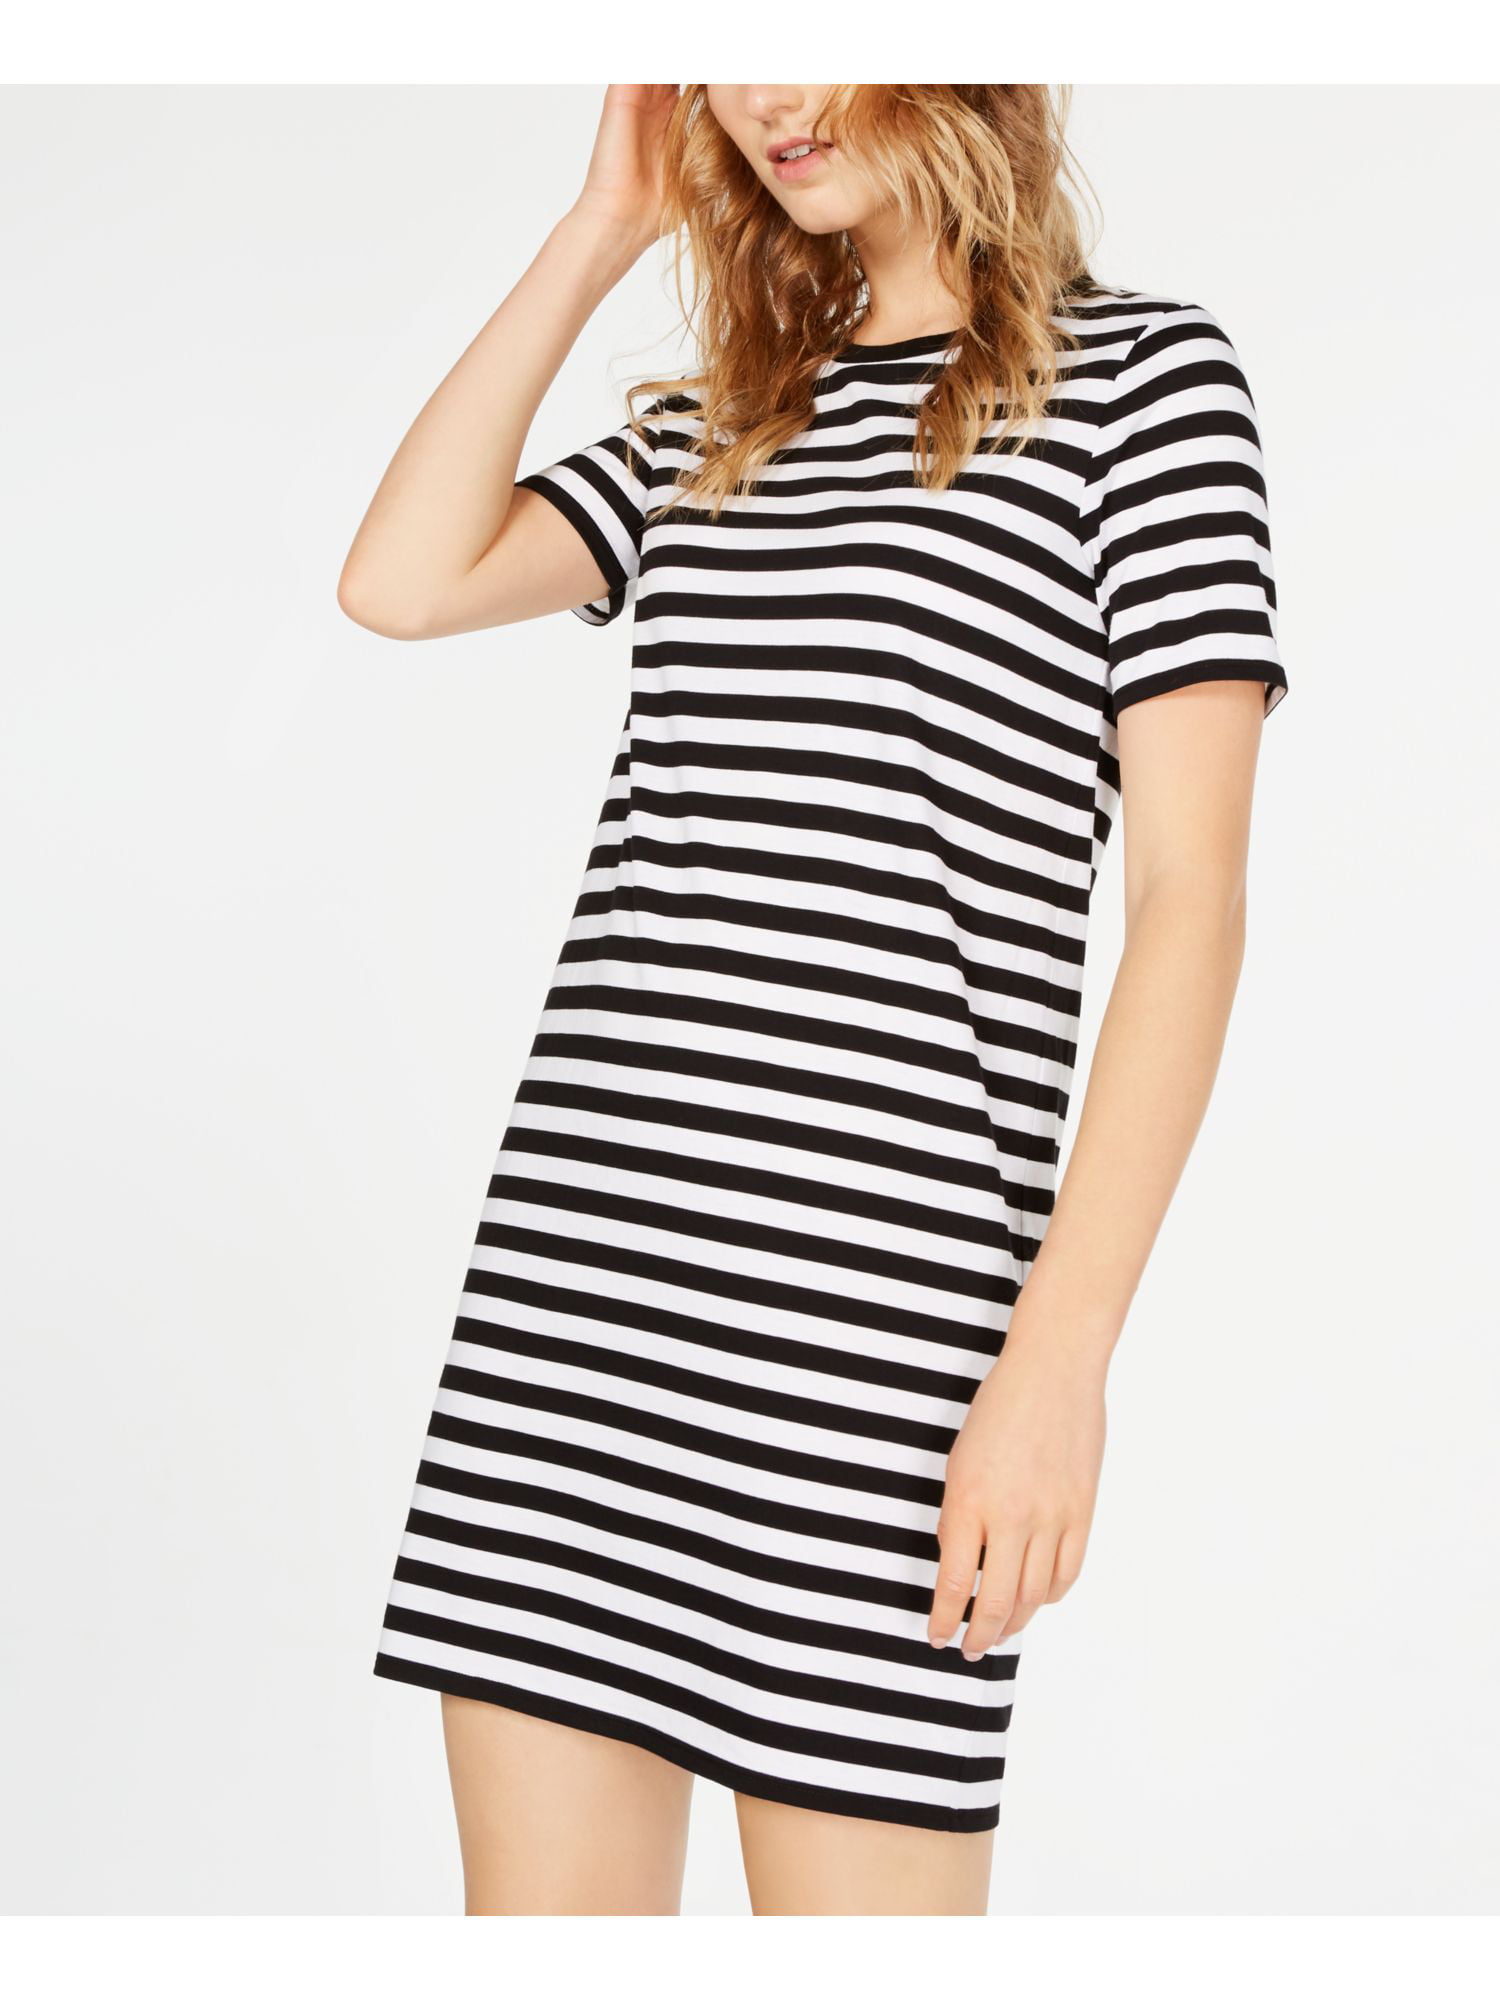 Km Large Size Spring Summer Fat Women Loose Long-sleeved Striped Dress